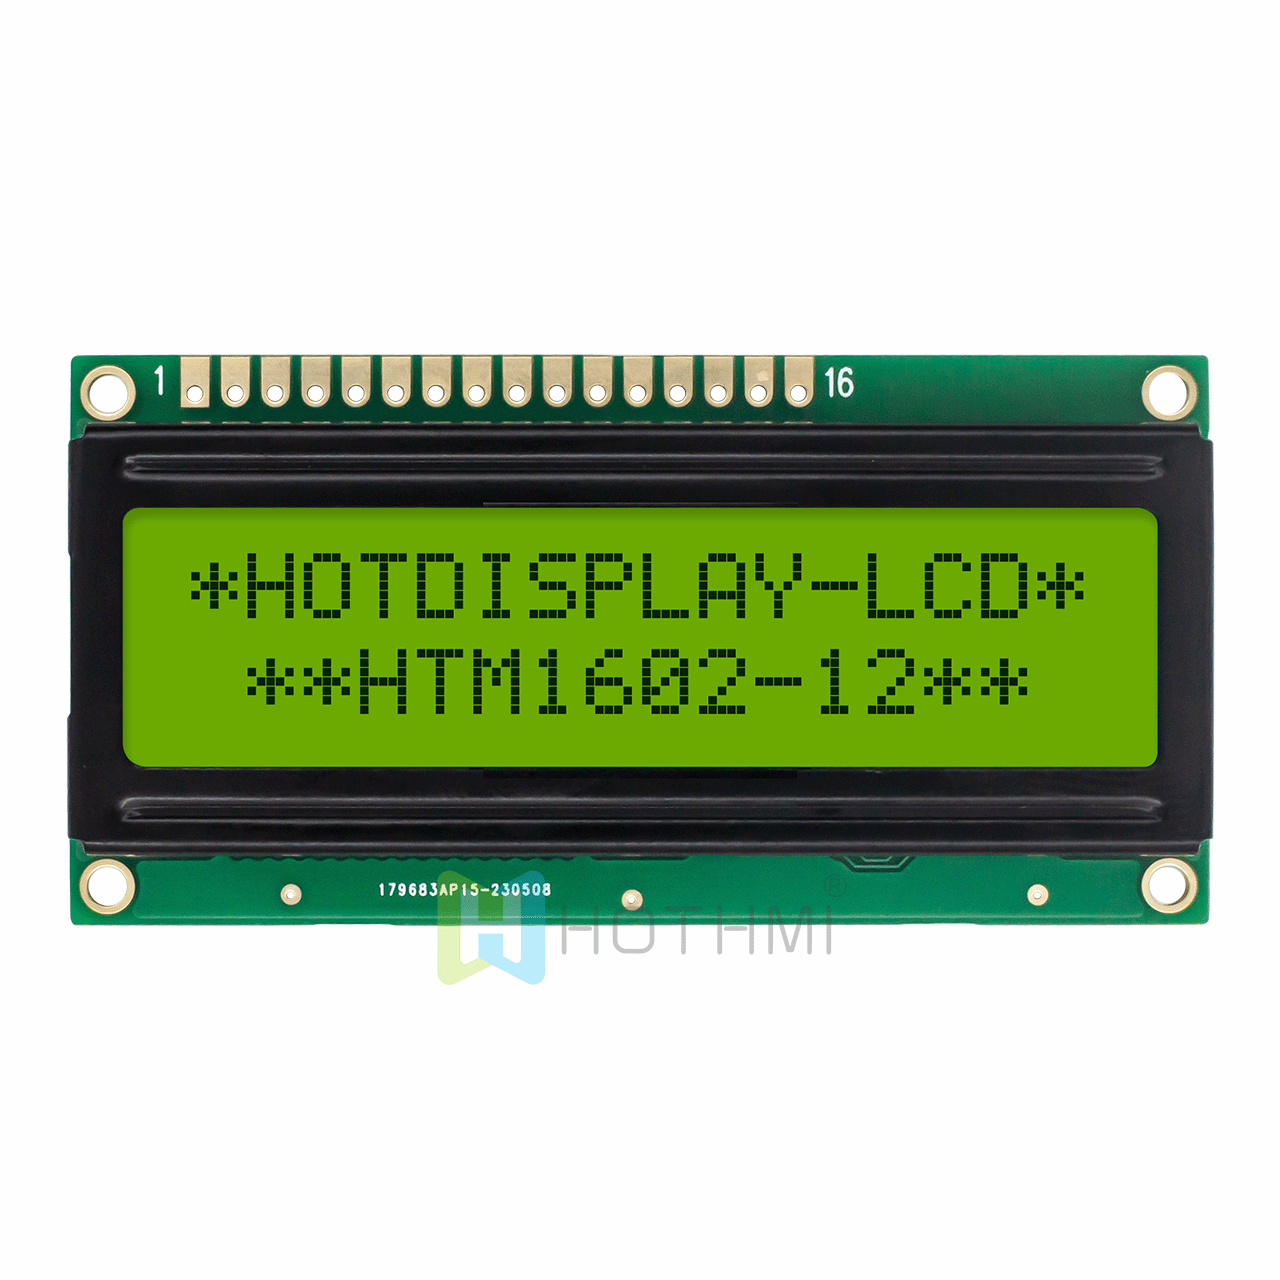 2X16 Character Yellow/Green Backlight LCD with STN+ Yellow/Green Display Arduino display